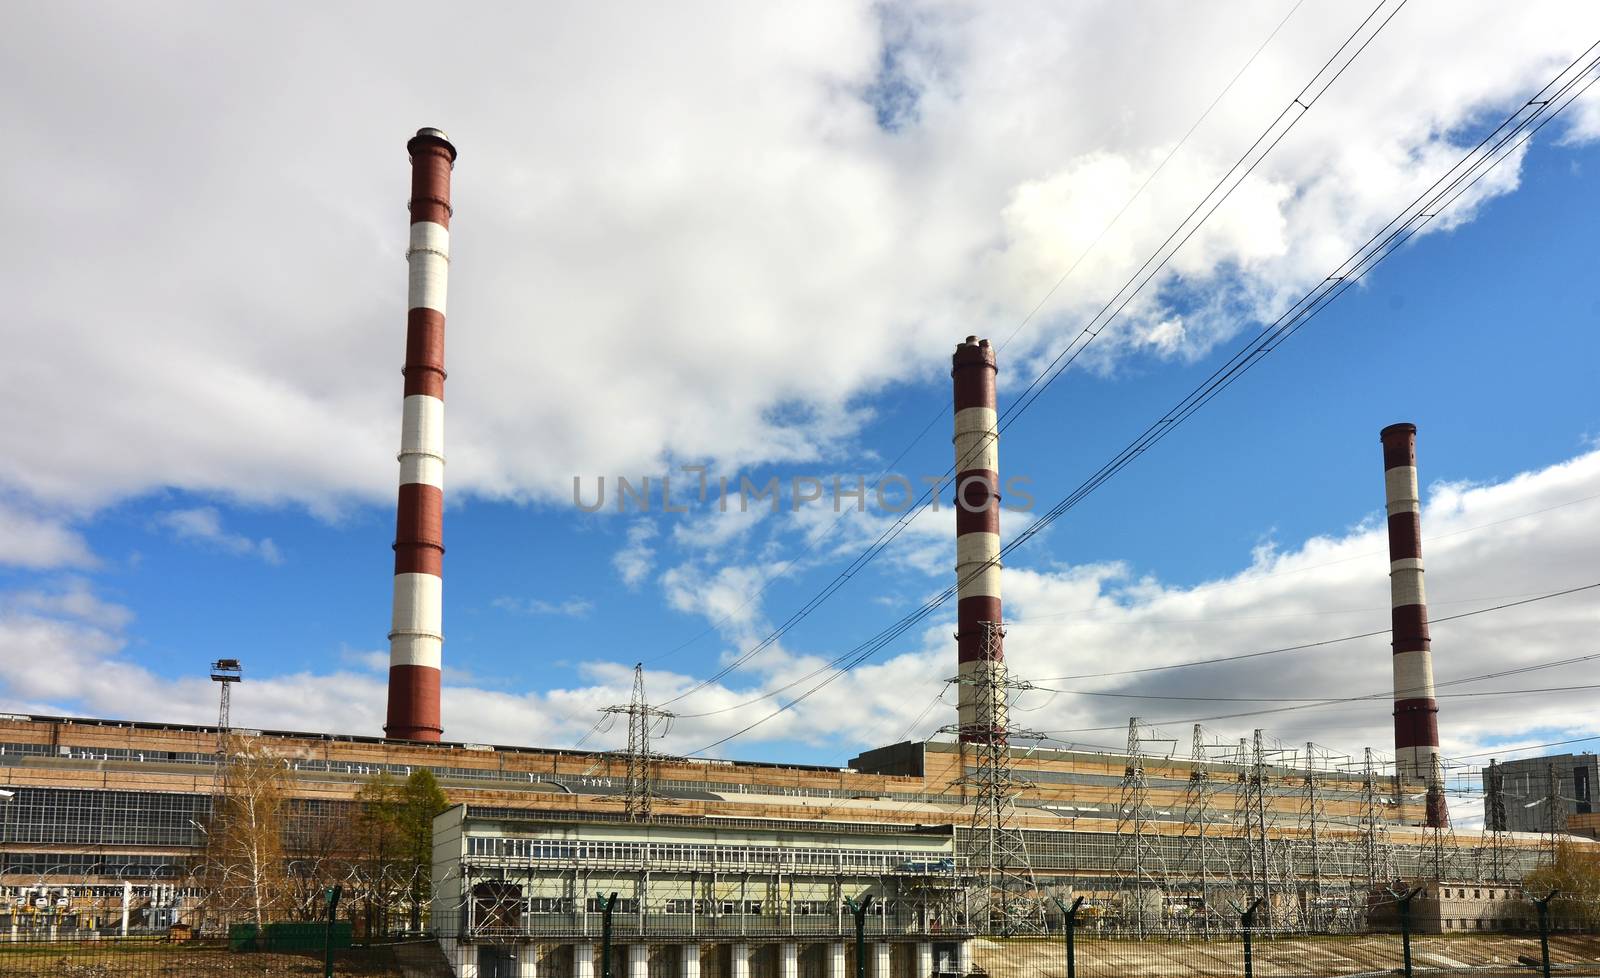 Electricity Authority Station, power plant, energy concept sky